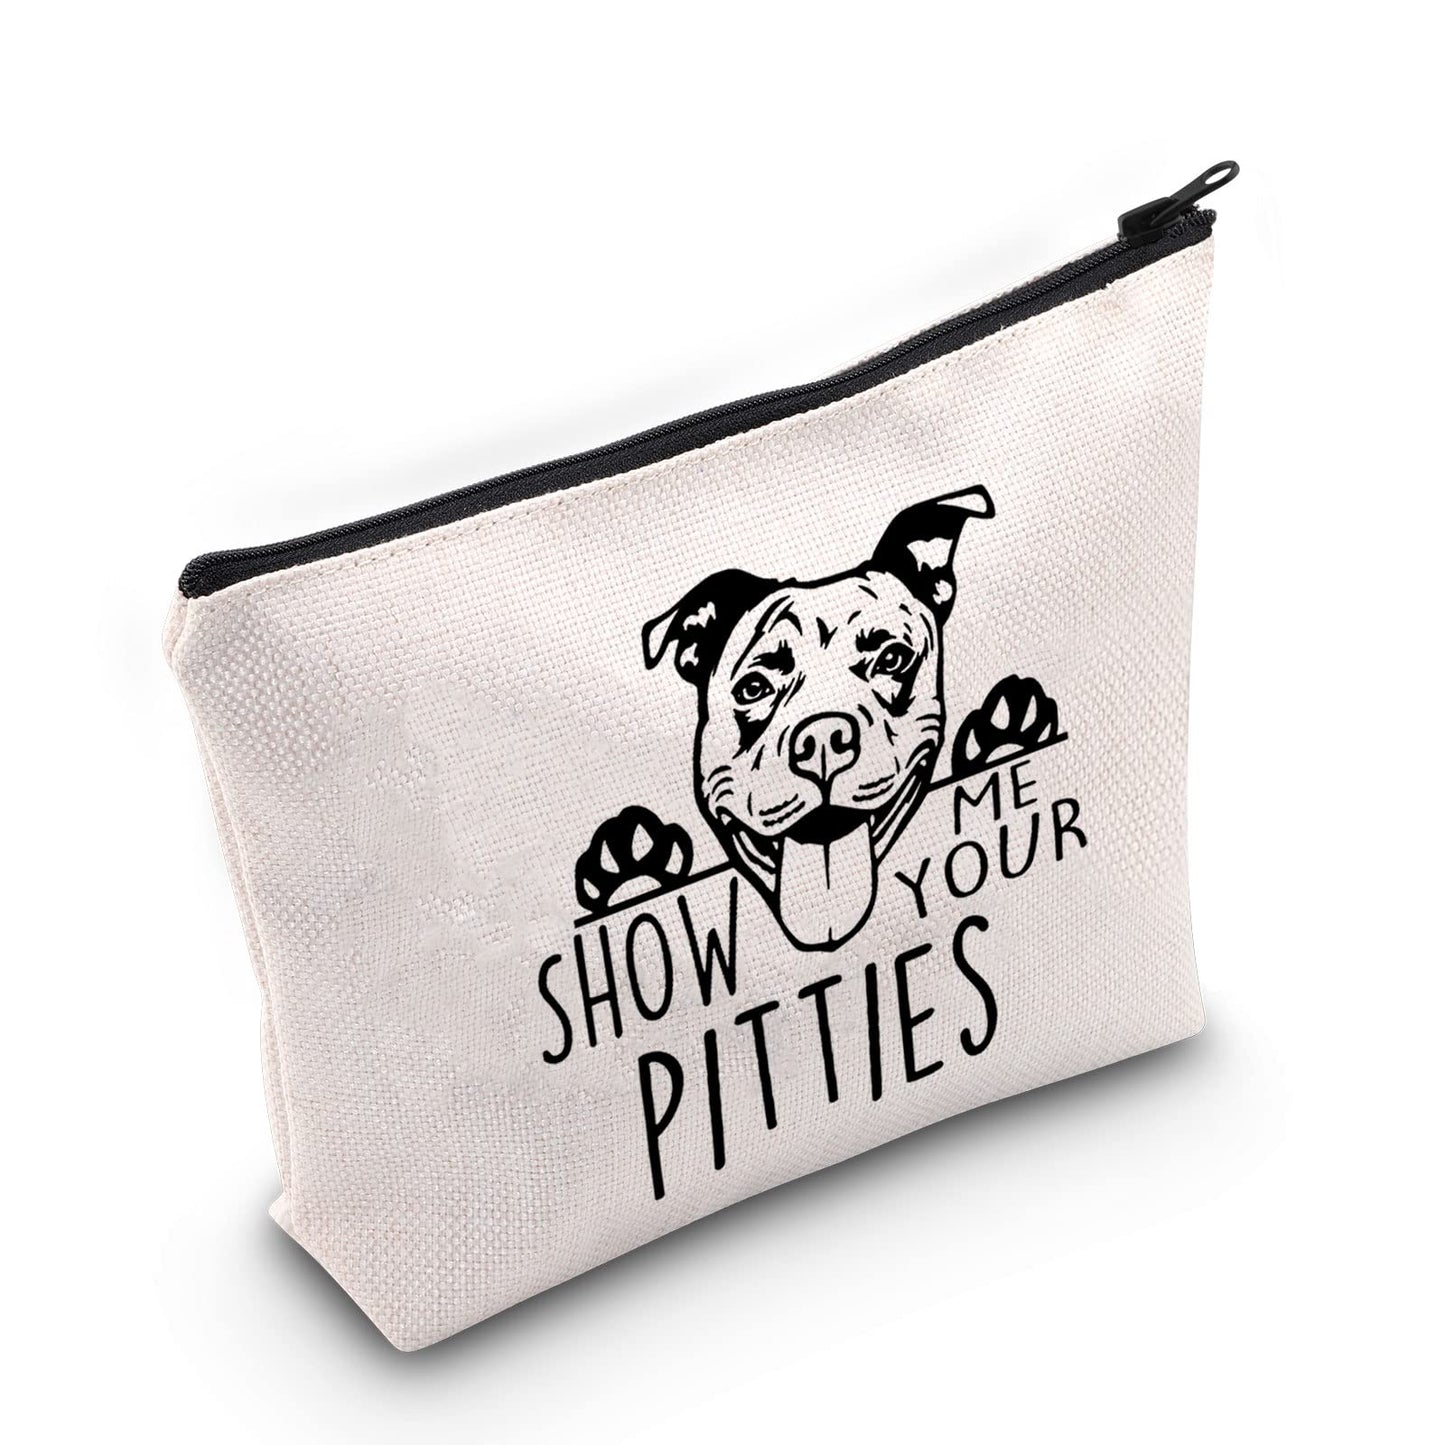 ZJXHPO Funny Pitbull Gift Show Me Your Pitties Dog Lovers Gift Pitbull Mom Cosmetic Bag Zipper Accessory Pouch (Pitties Dog)